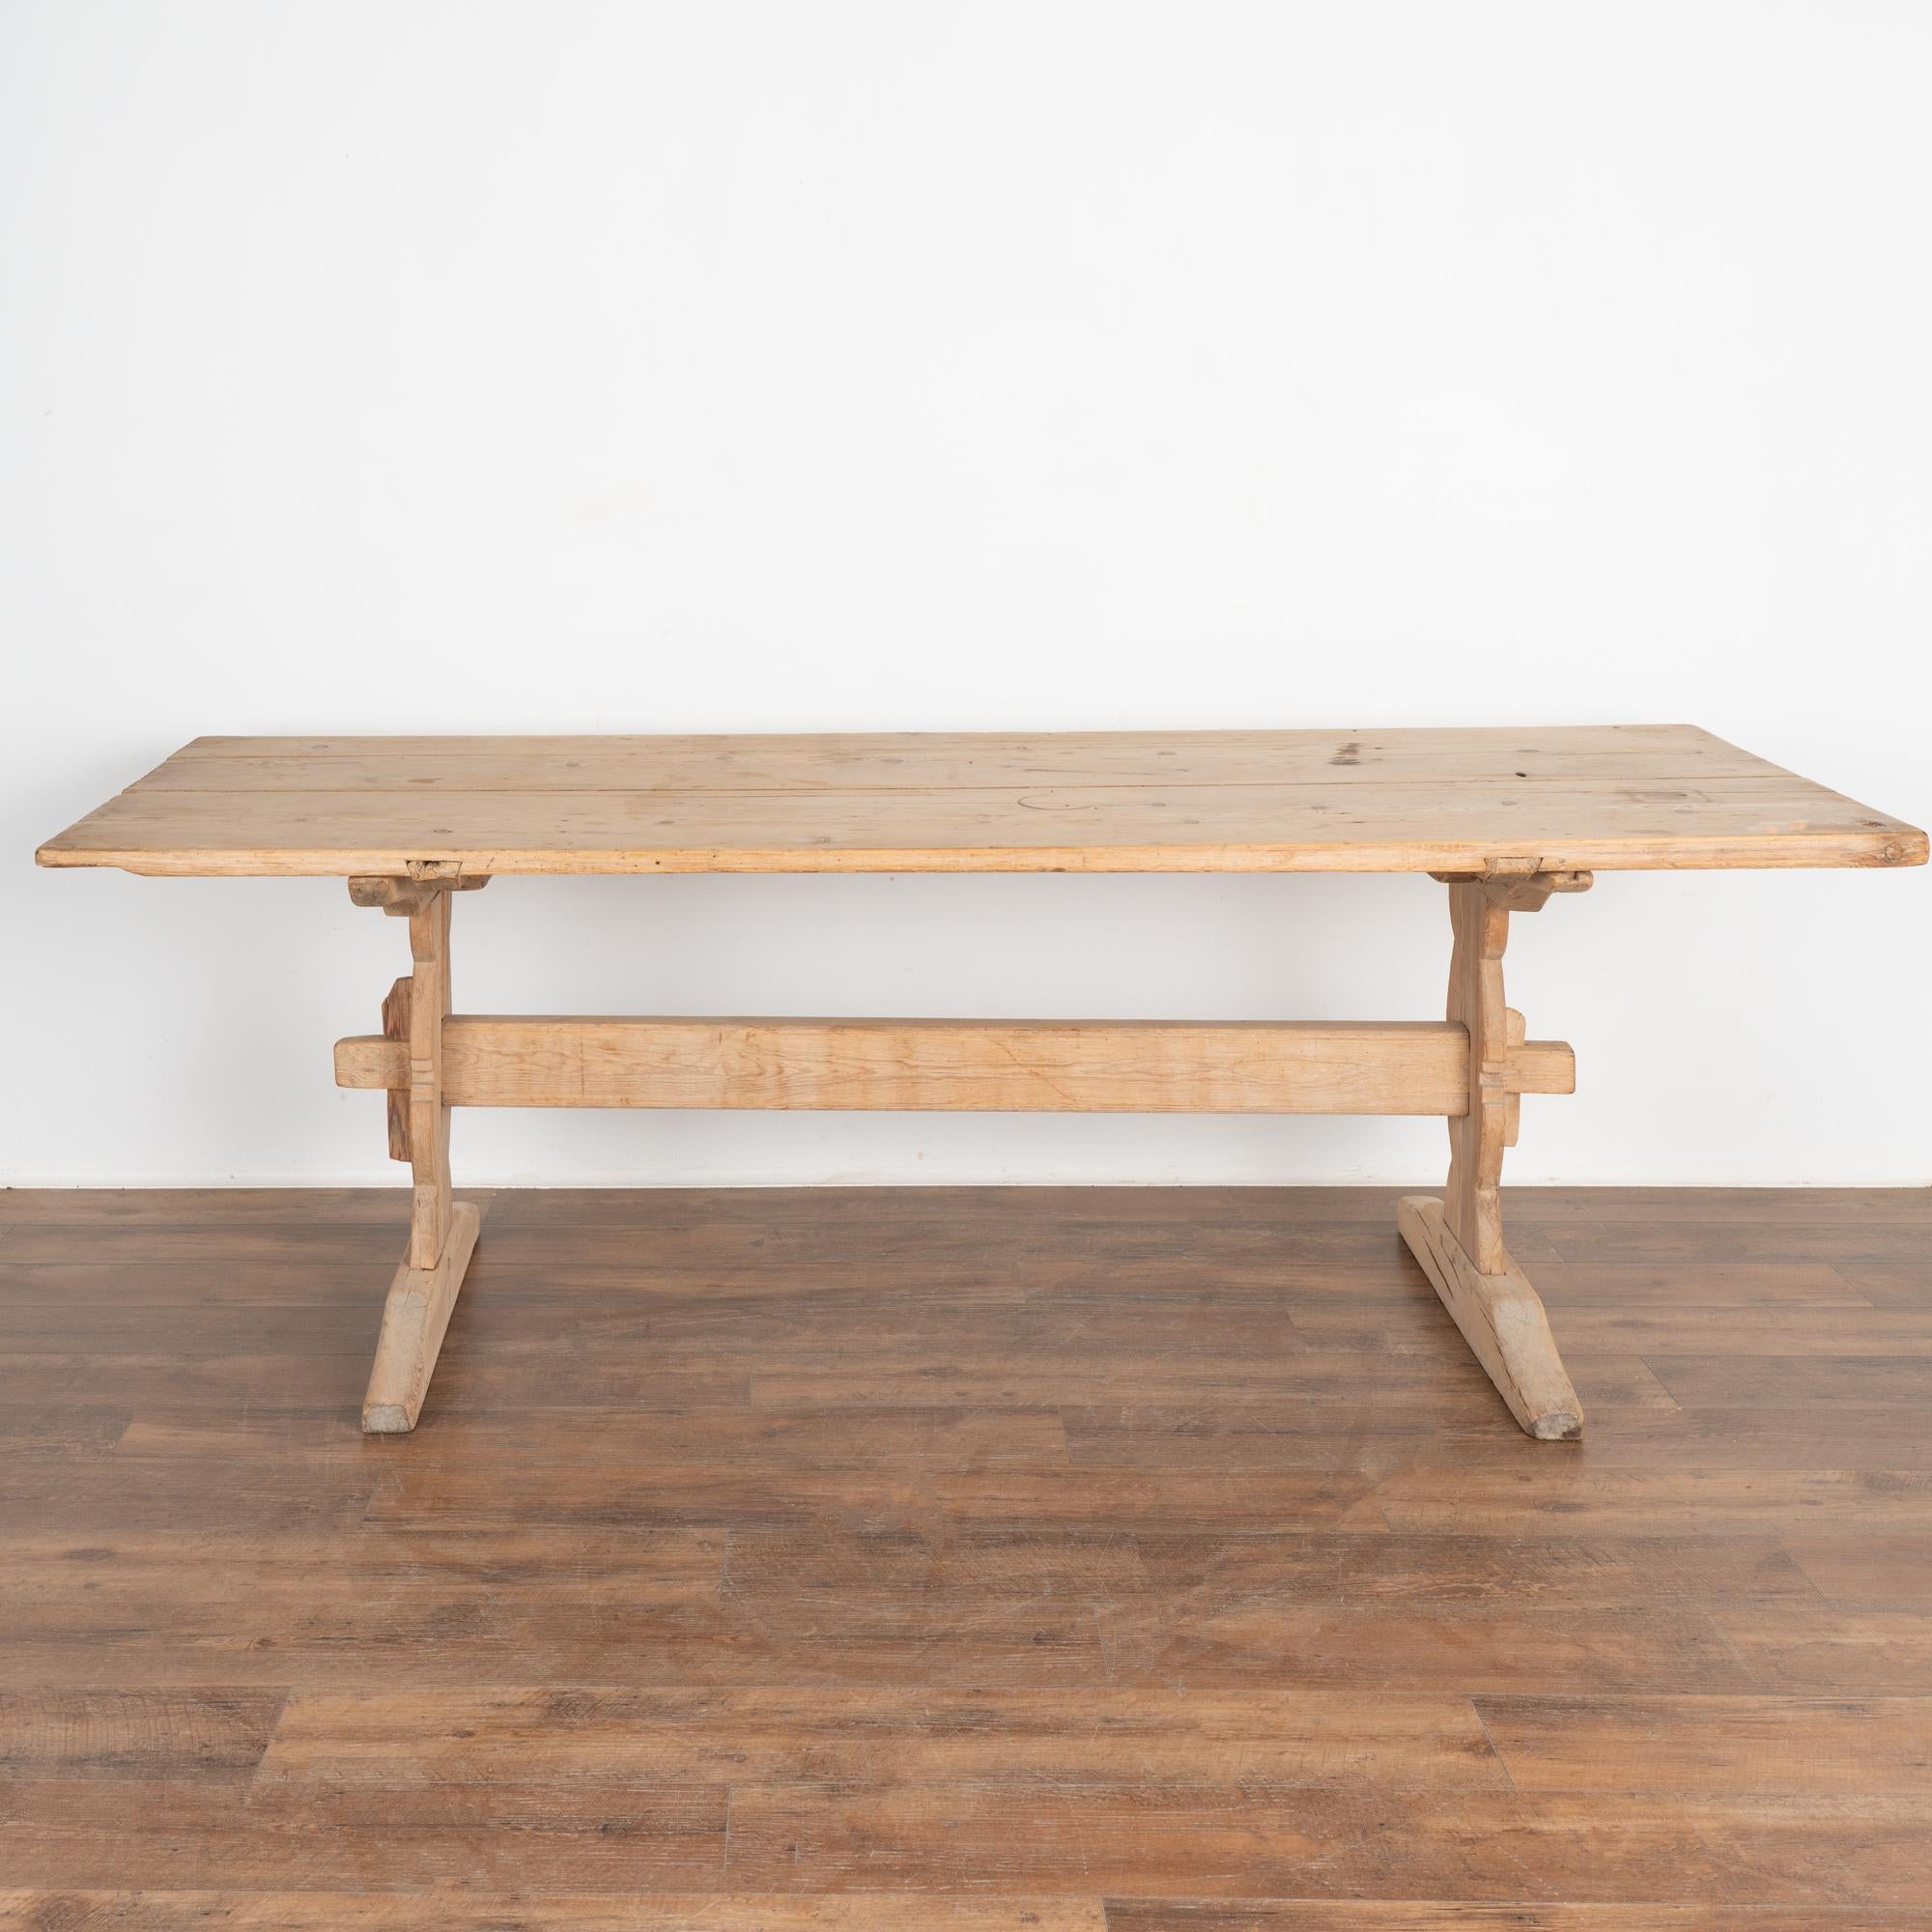 Swedish Pine Farm Trestle Table Dining Table from Sweden, circa 1820